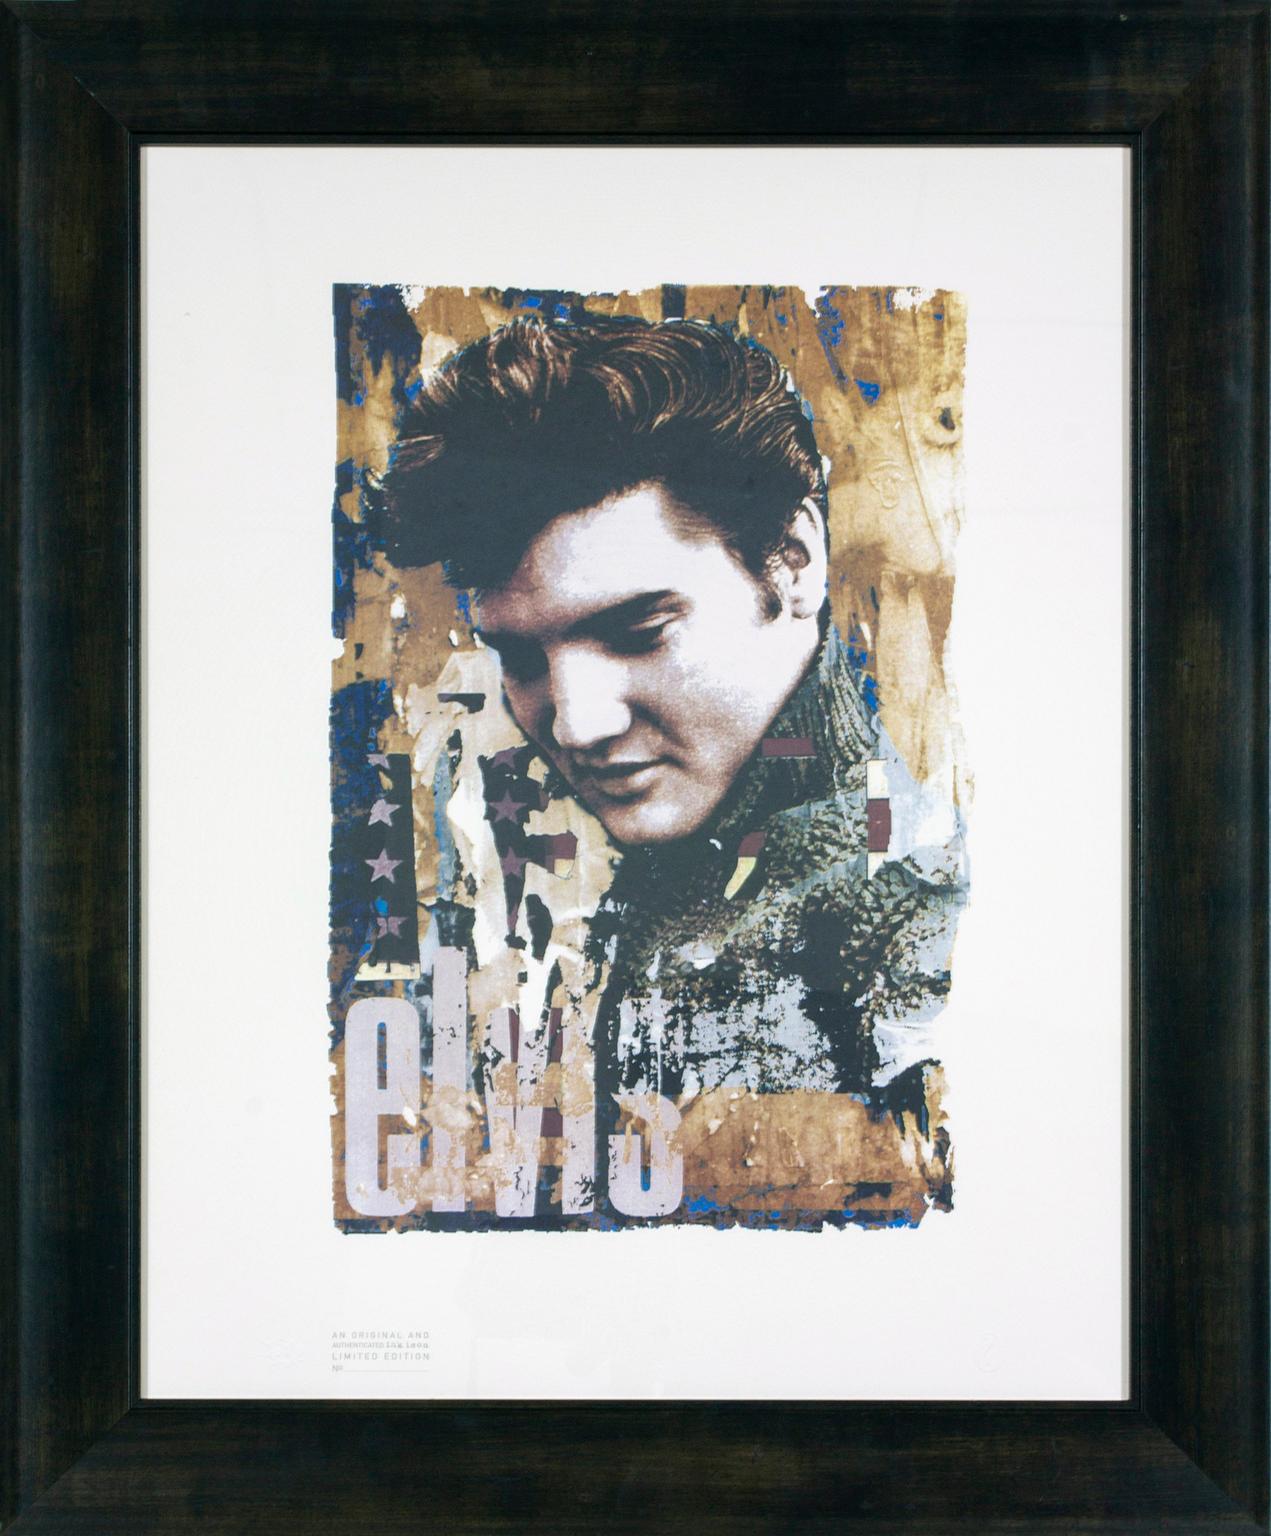 "Elvis Presley" limited edition silkscreen print by artist Gered Mankowitz. Image size: 20 1/2 x 13 1/2 inches. Embossed with stamp on lower left and ? stamp on lower right. Printed with "An original and authenticated ink icon limited edition no" on